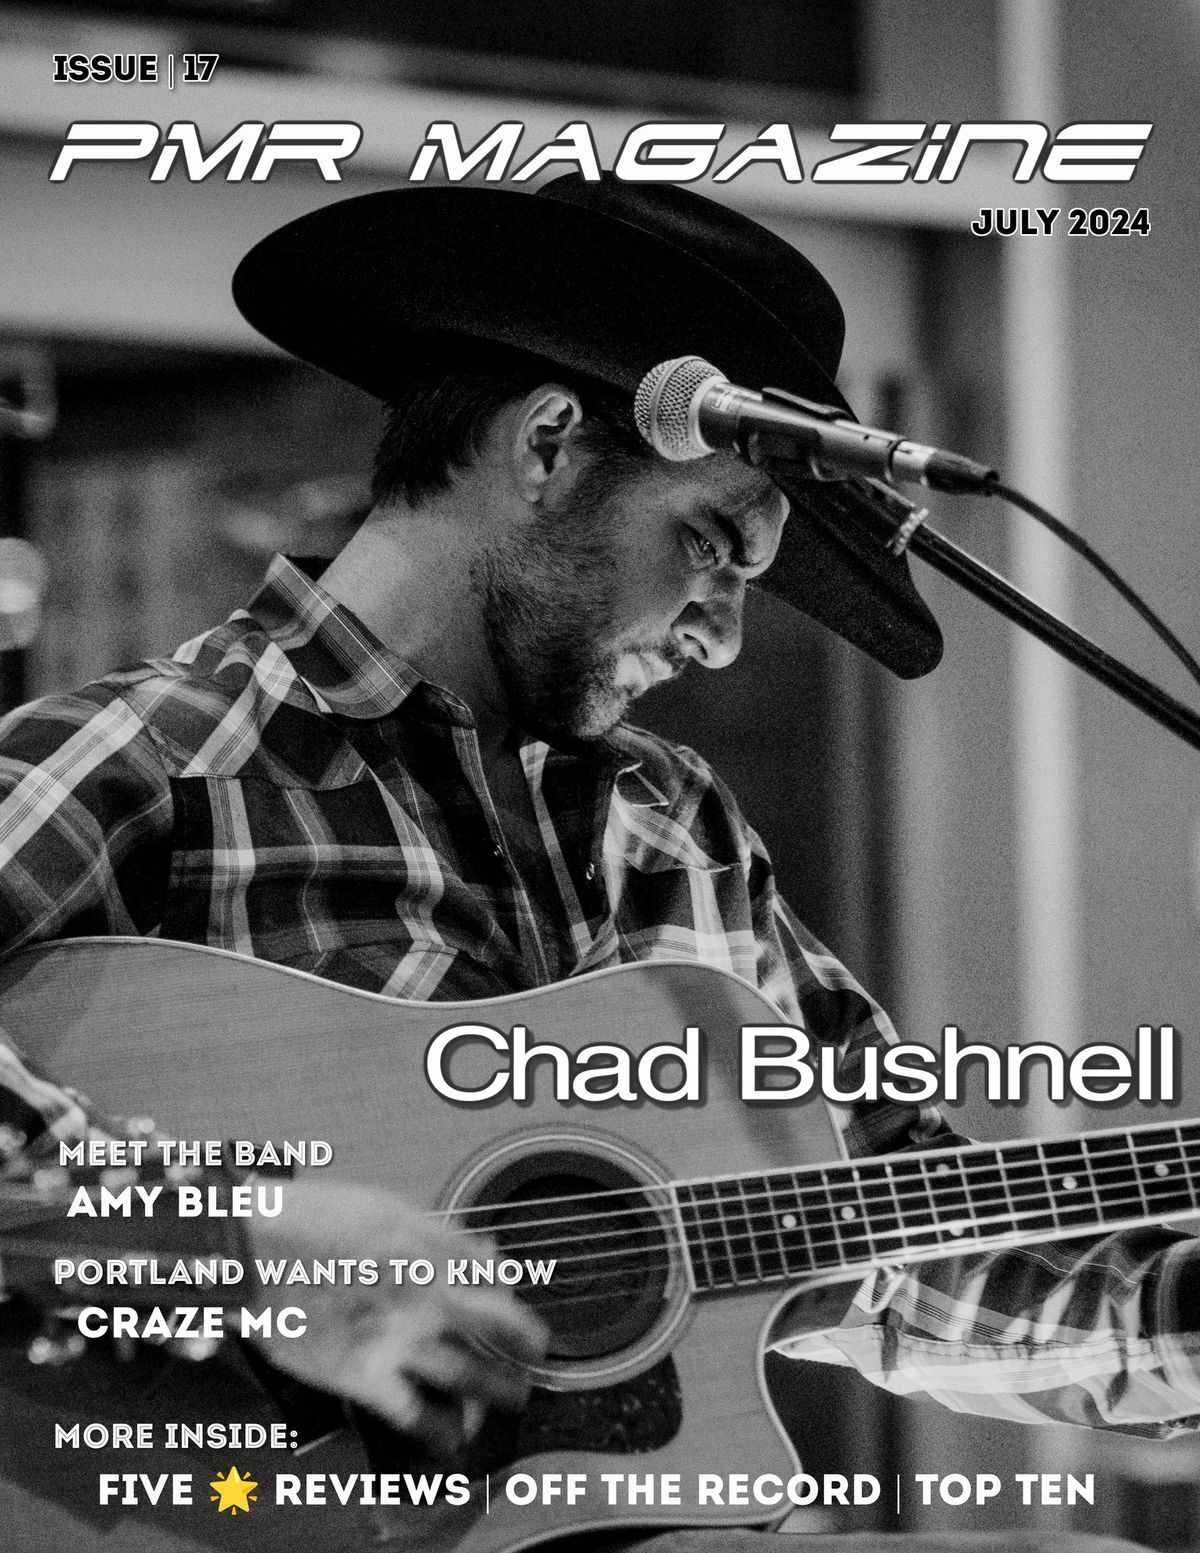 Chad Bushnell Magazine Release Party